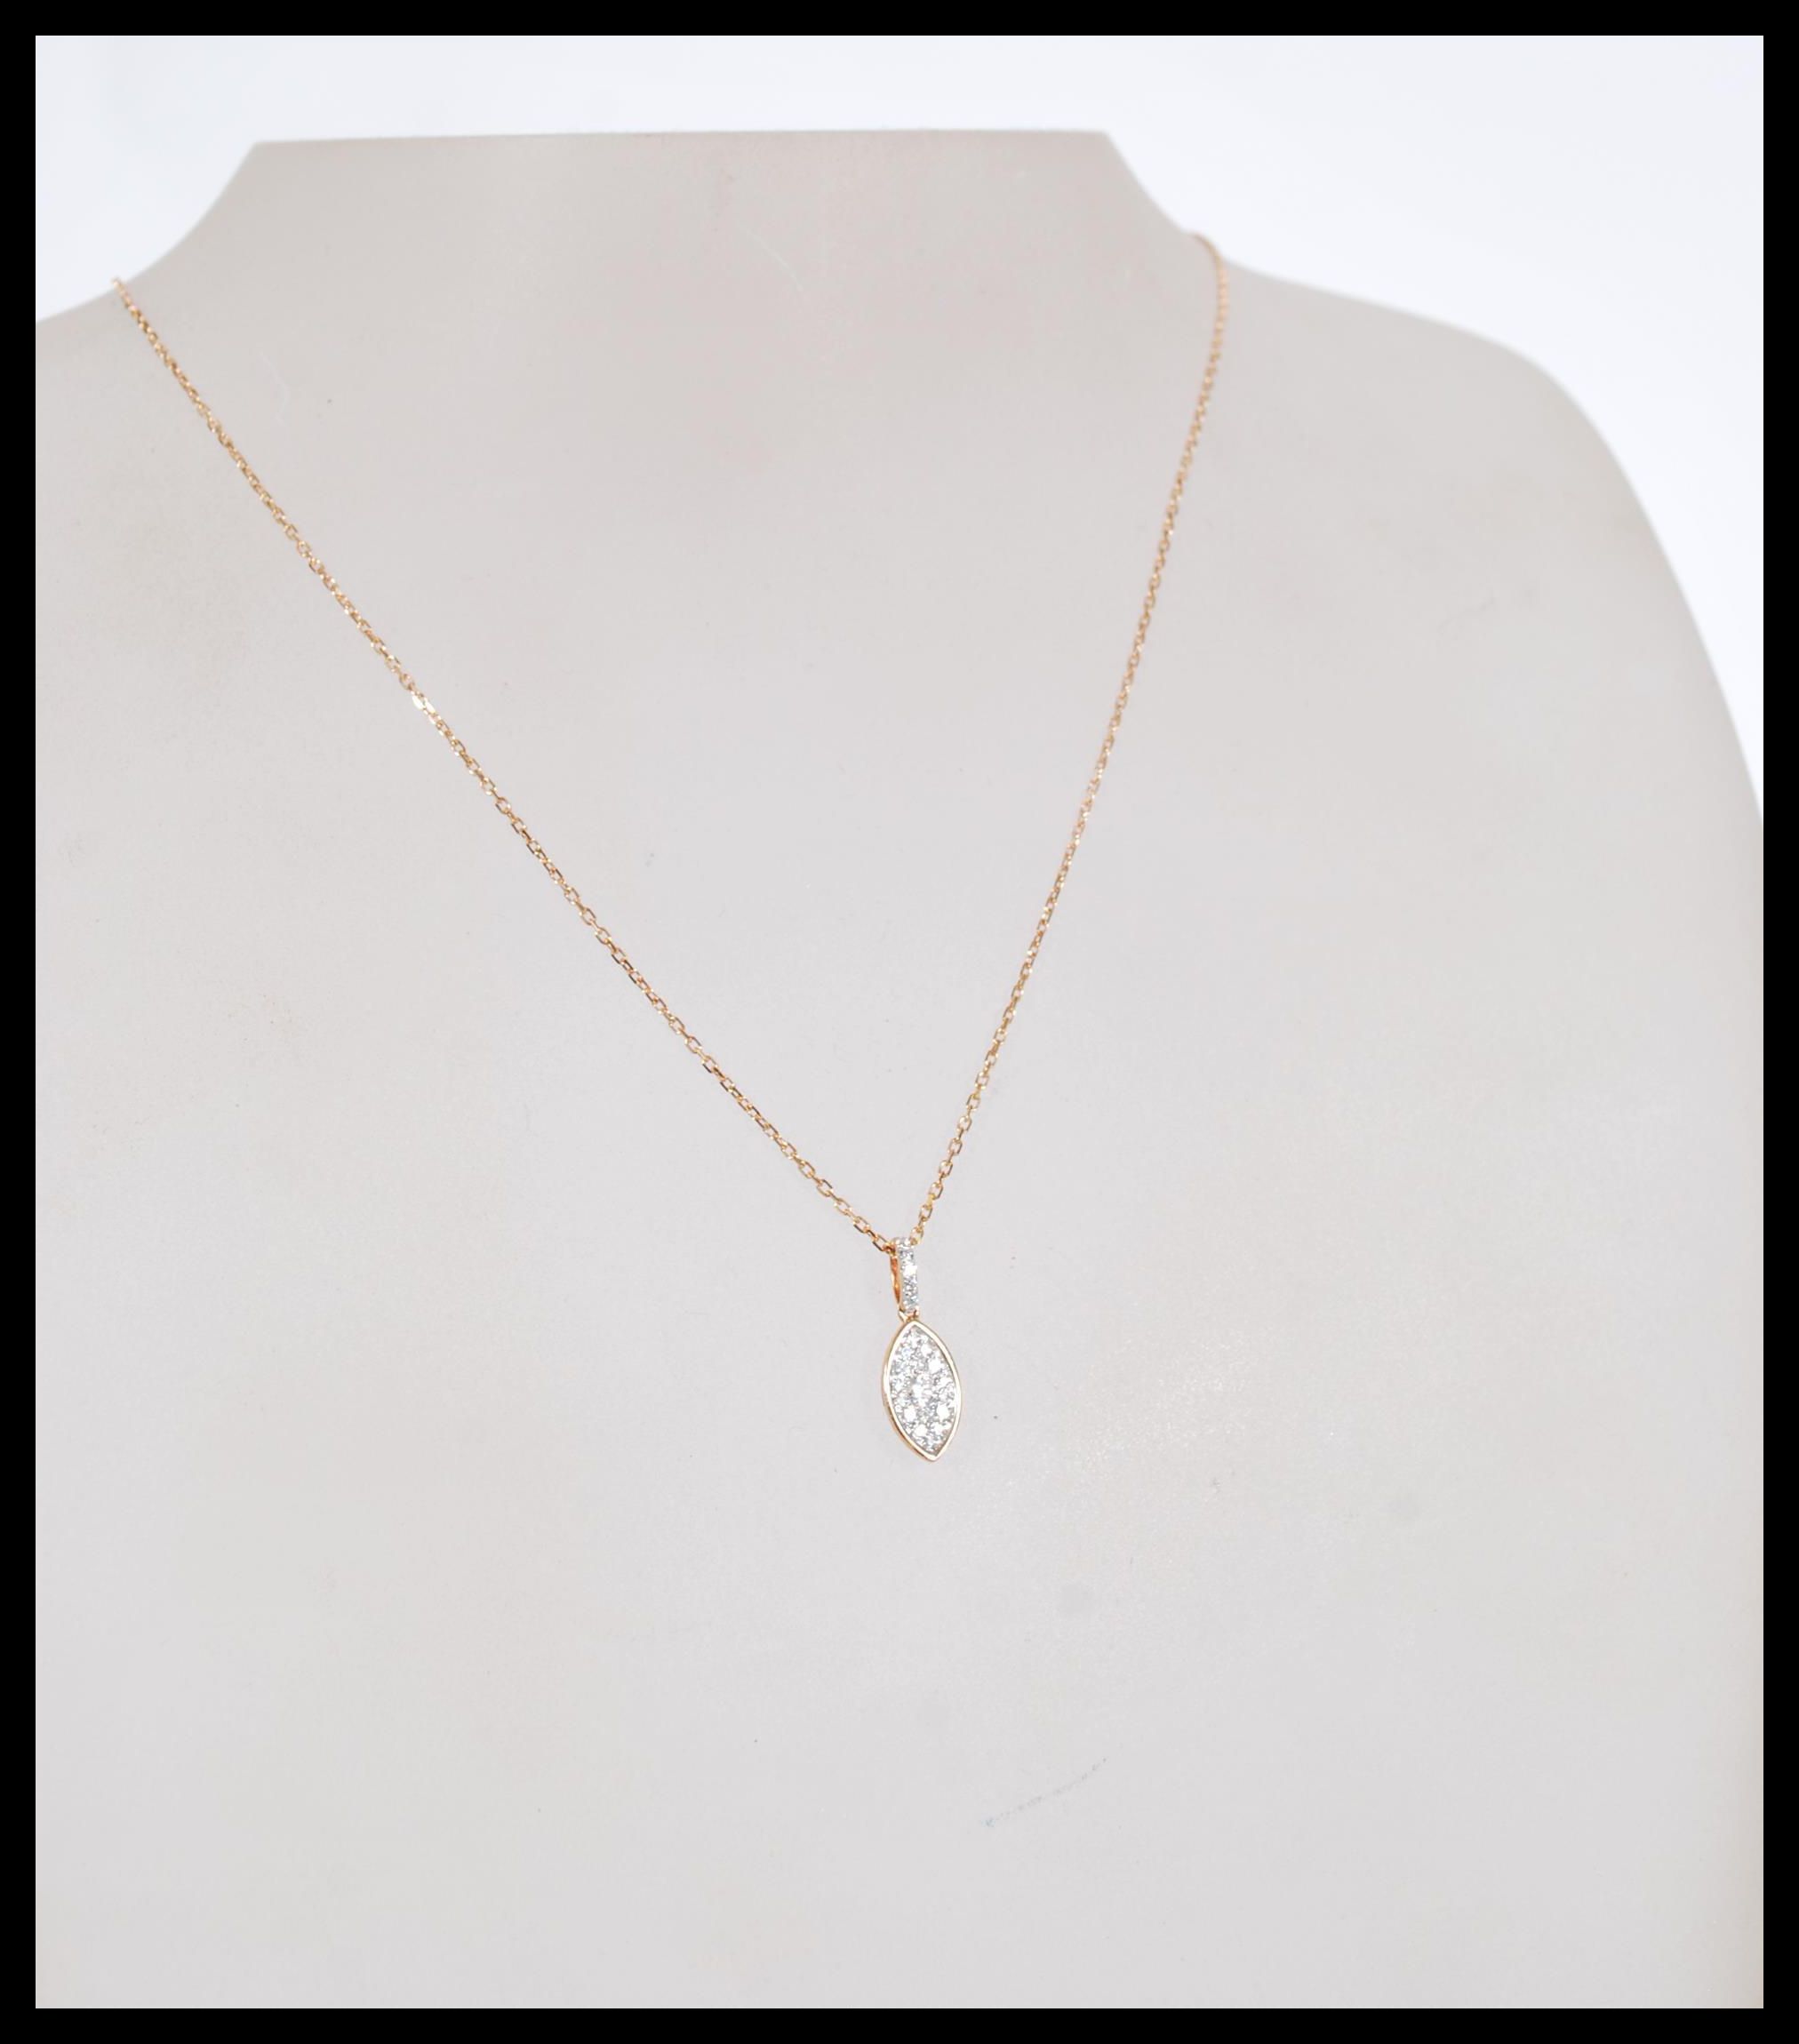 An 19ct rose gold and diamond pendant necklace hav